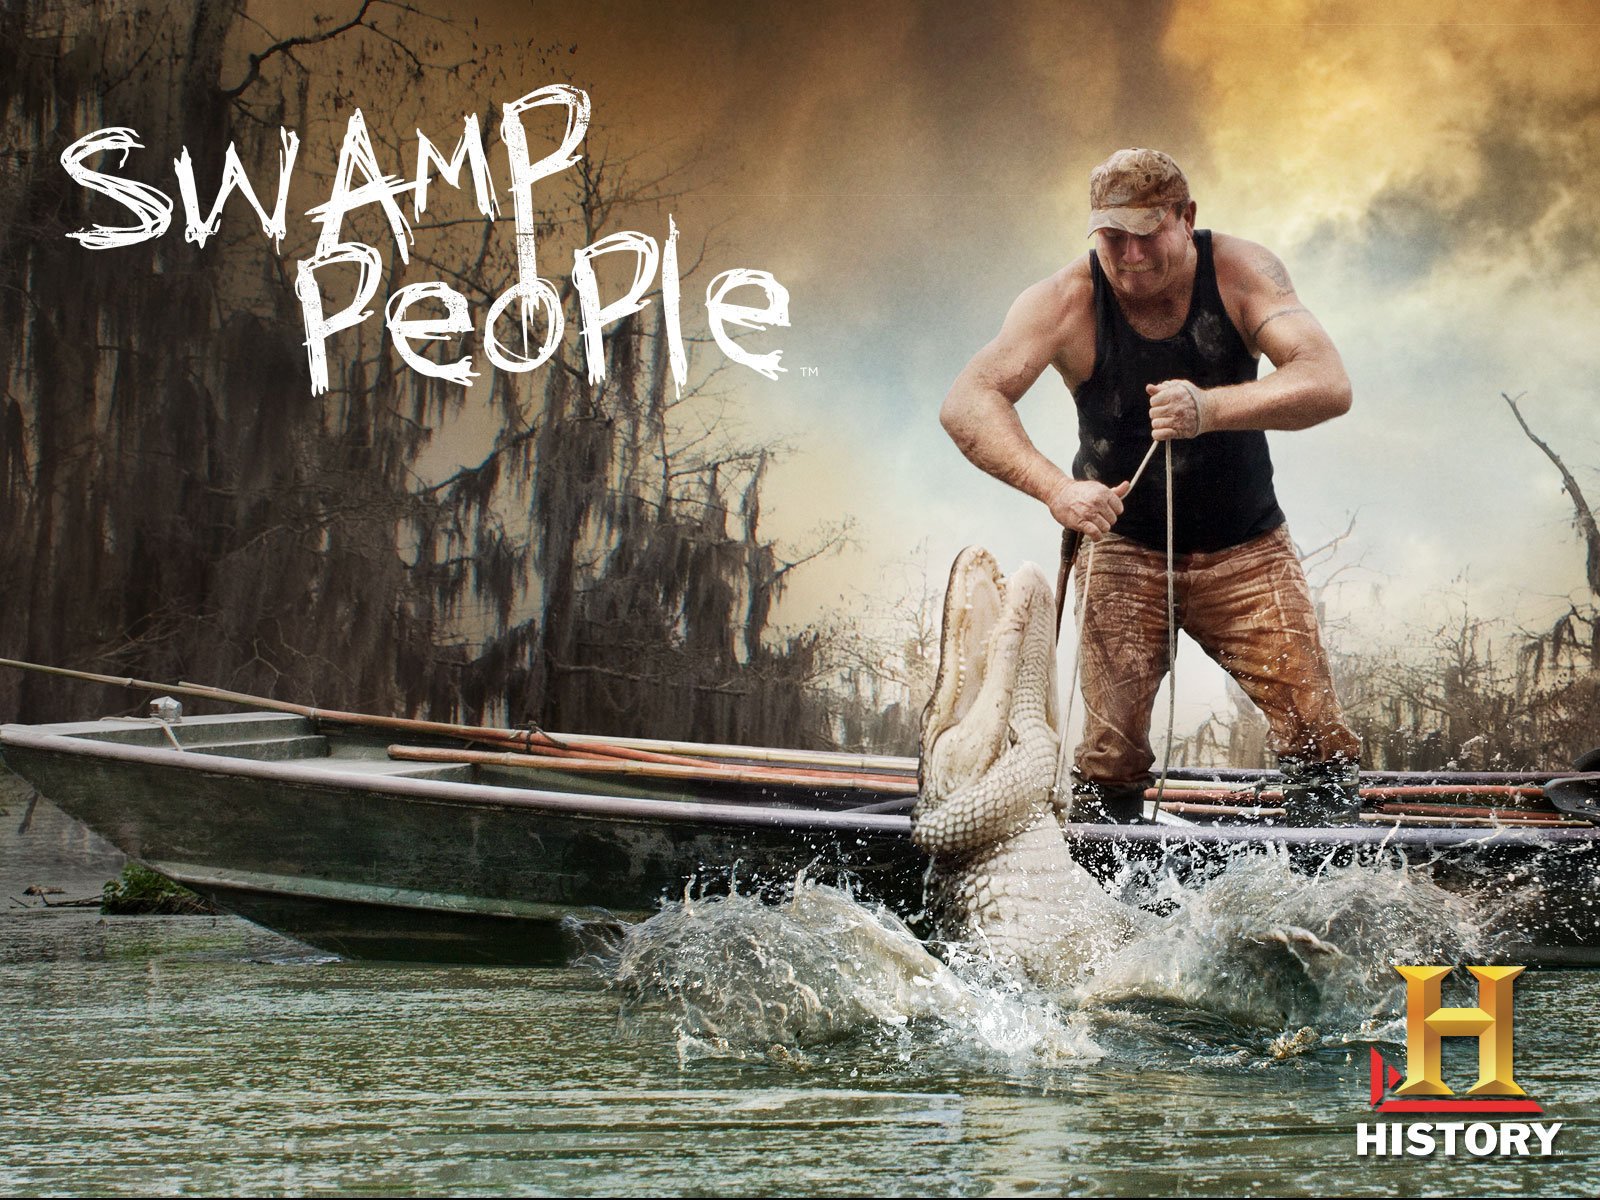 Swamp People" - What Is It About? 